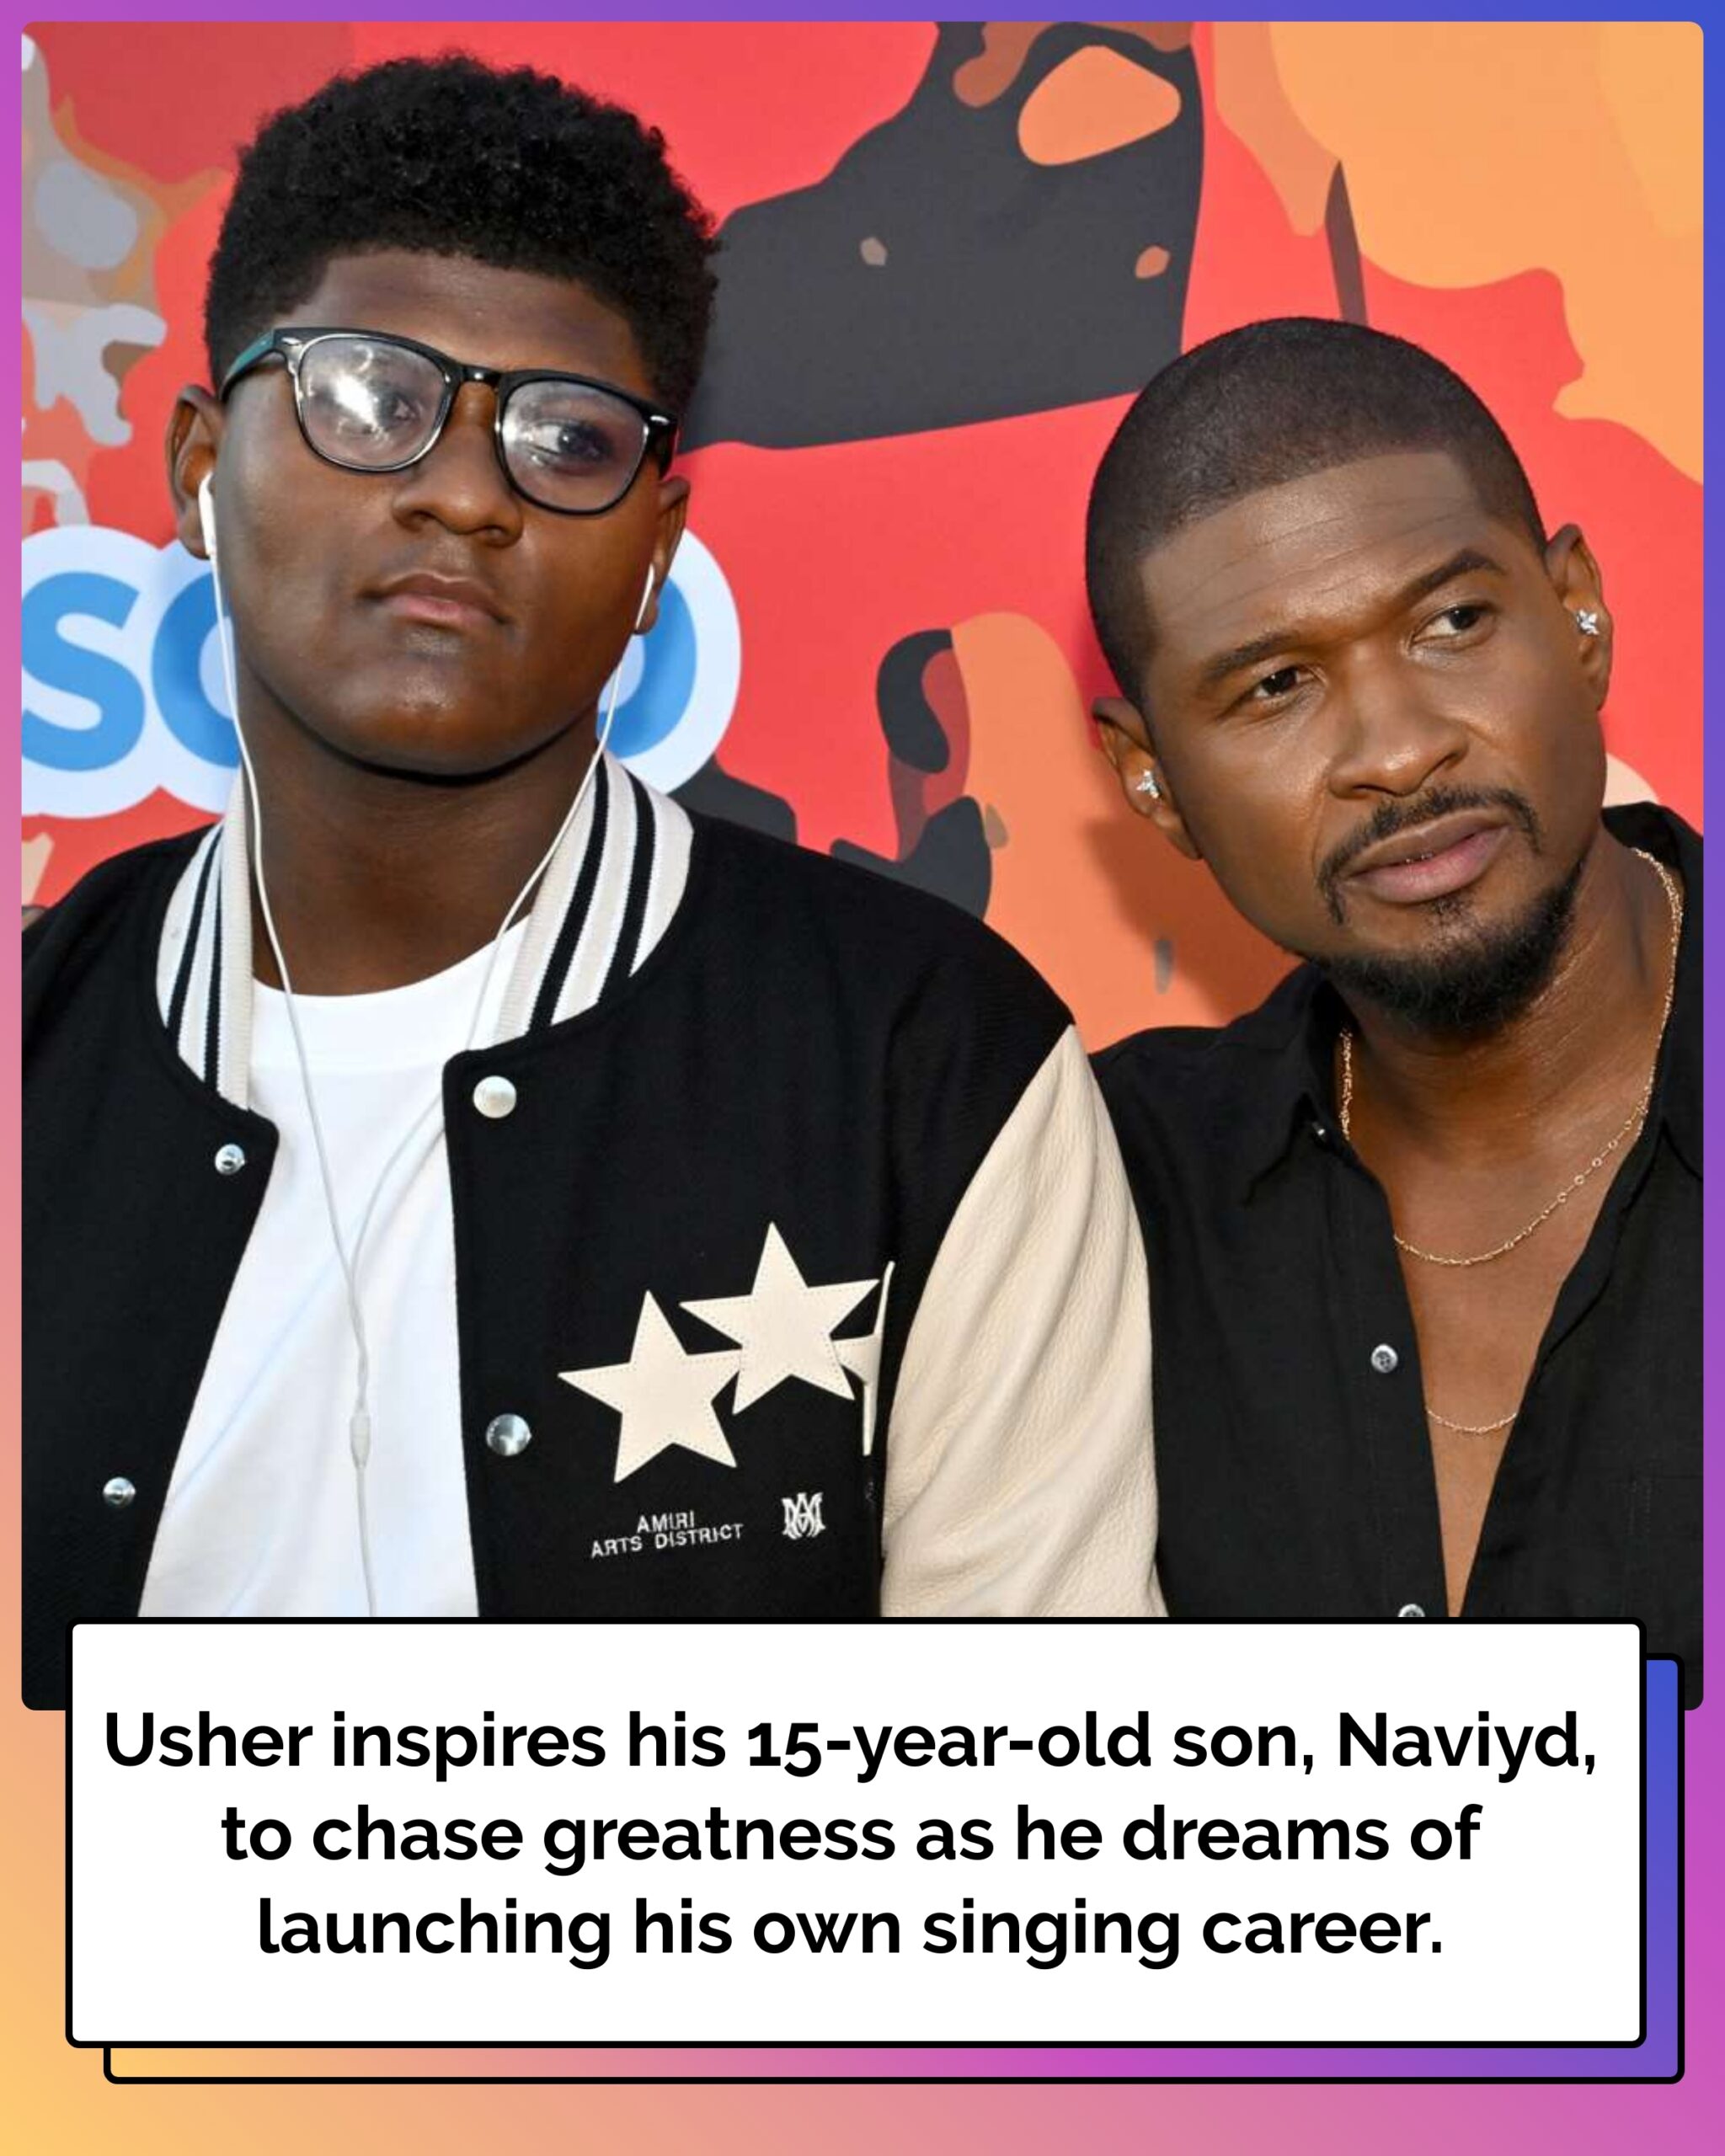 Usher Encourages Son Naviyd to ‘Be Great’ as 15-Year-Old Hopes to Start His Own Singing Career